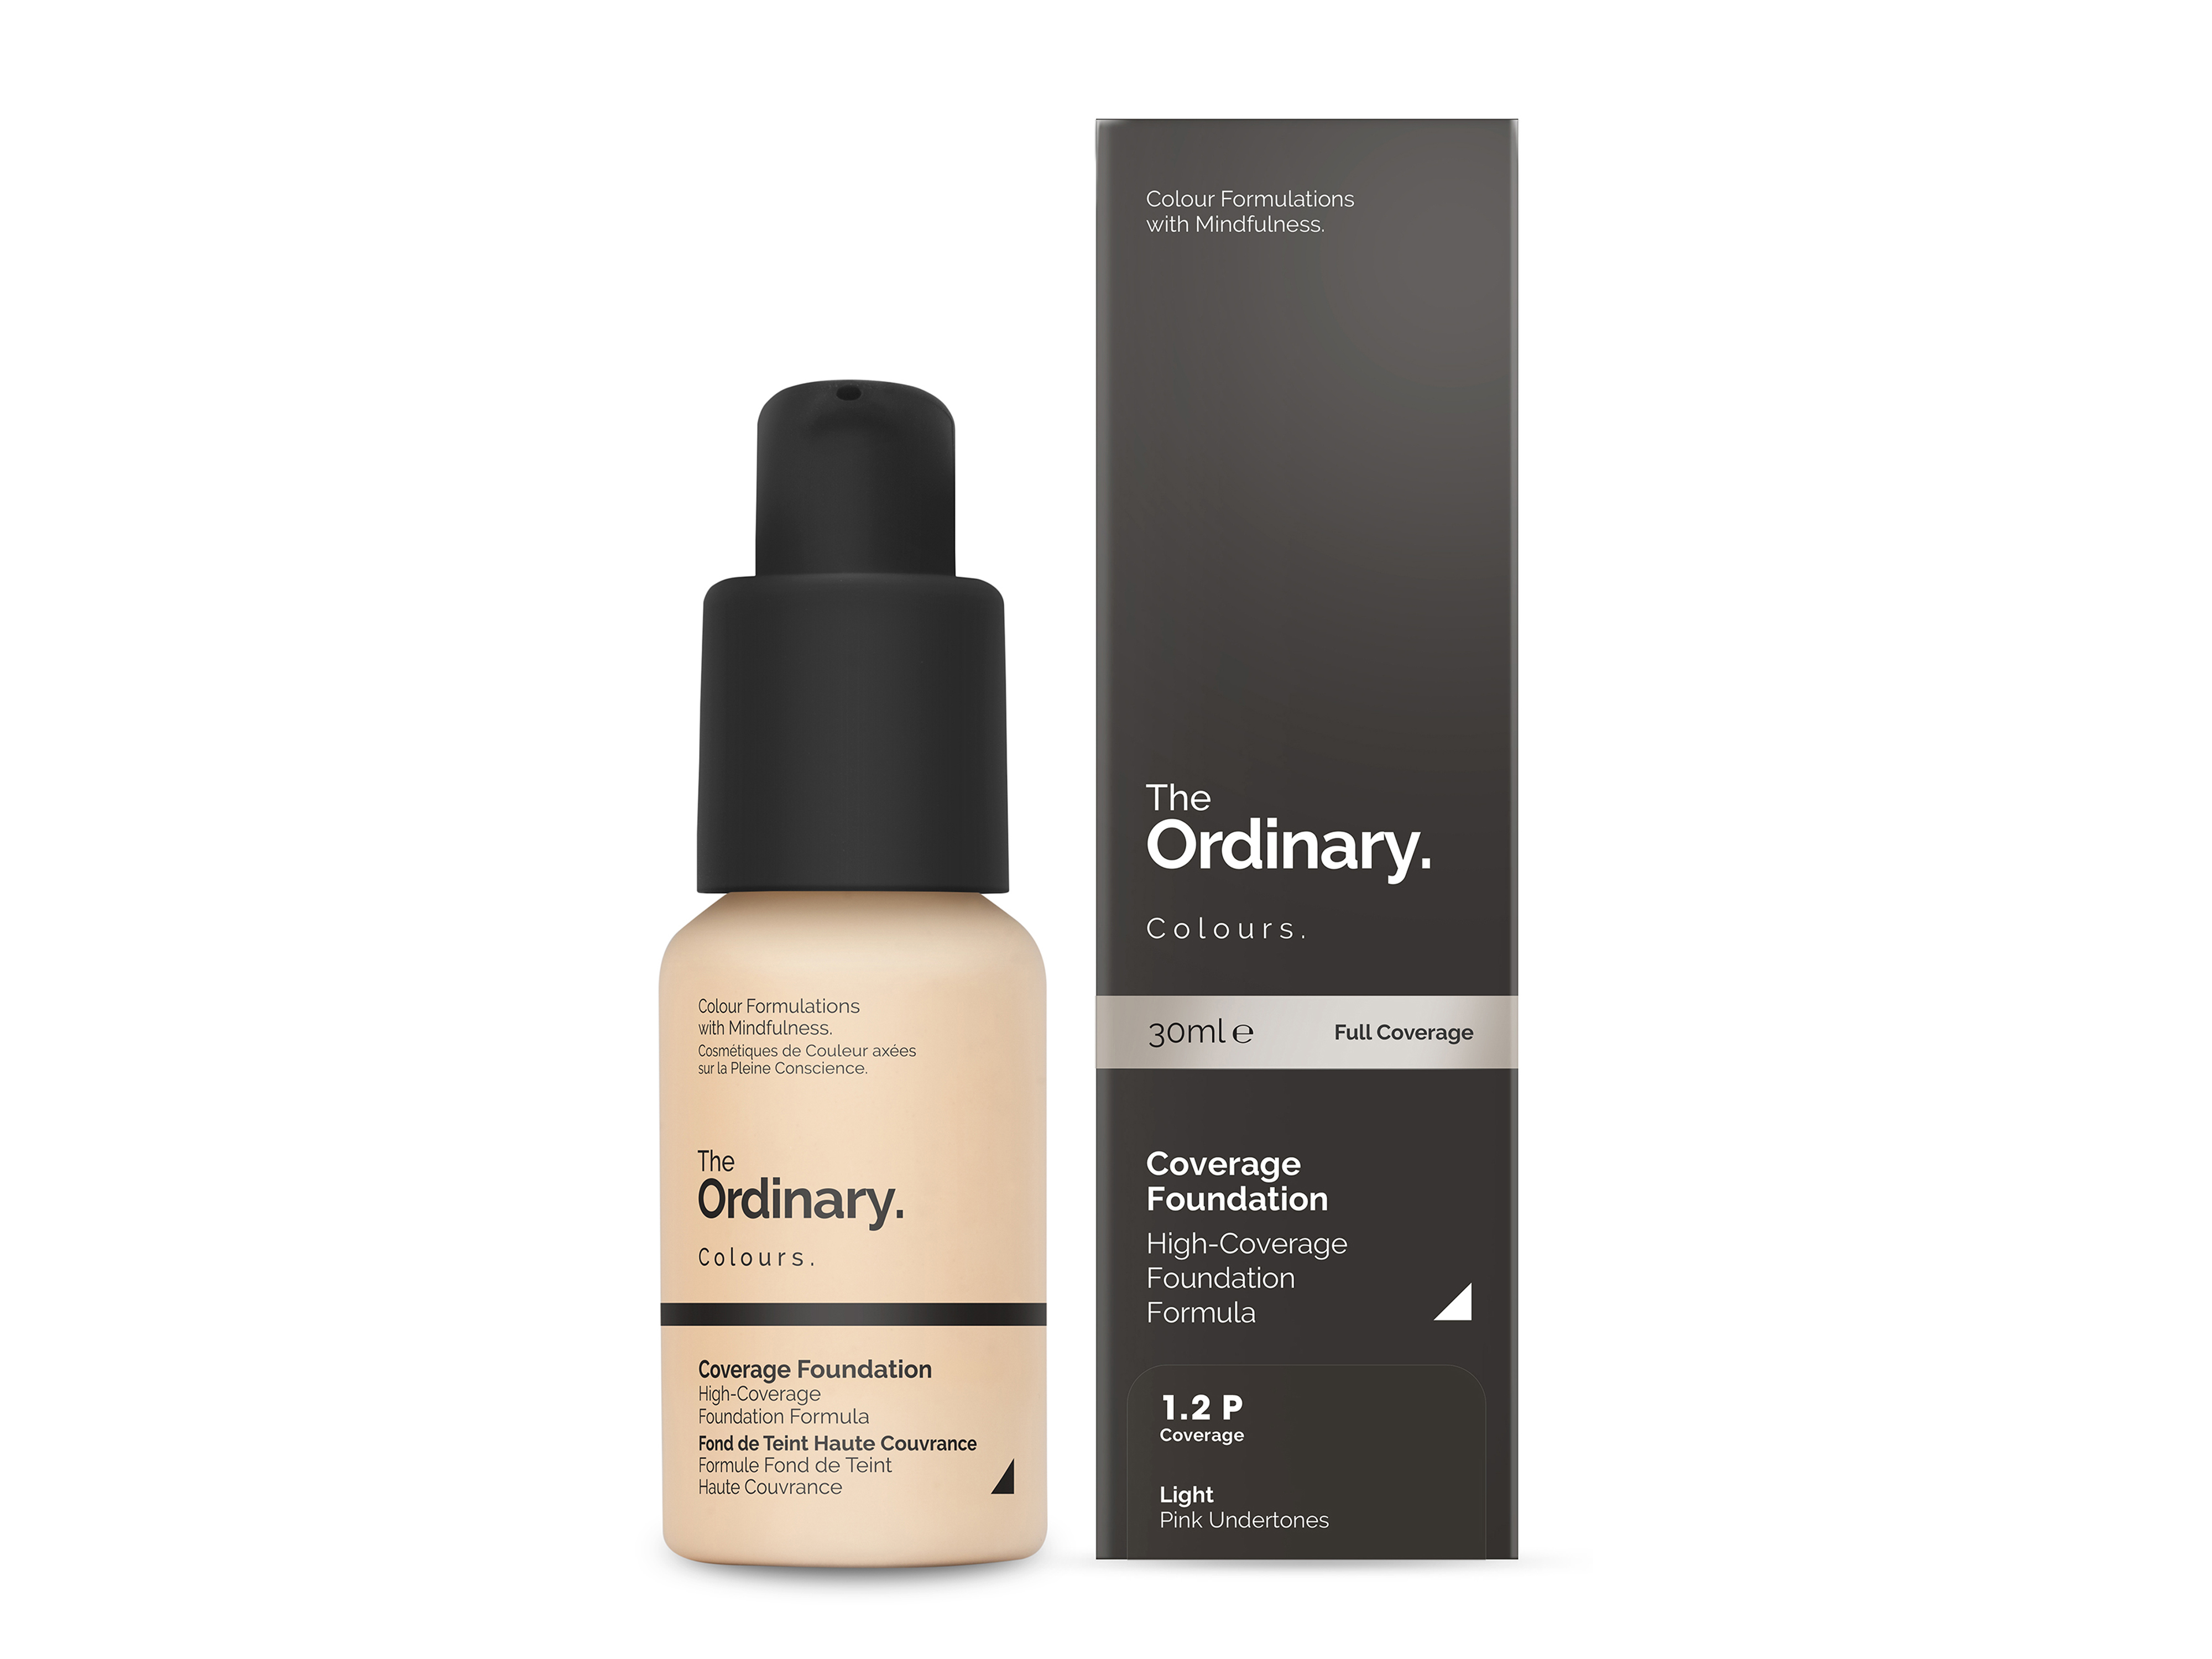 The Ordinary Coverage Foundation, 1.2 P Light Pink, 30 ml